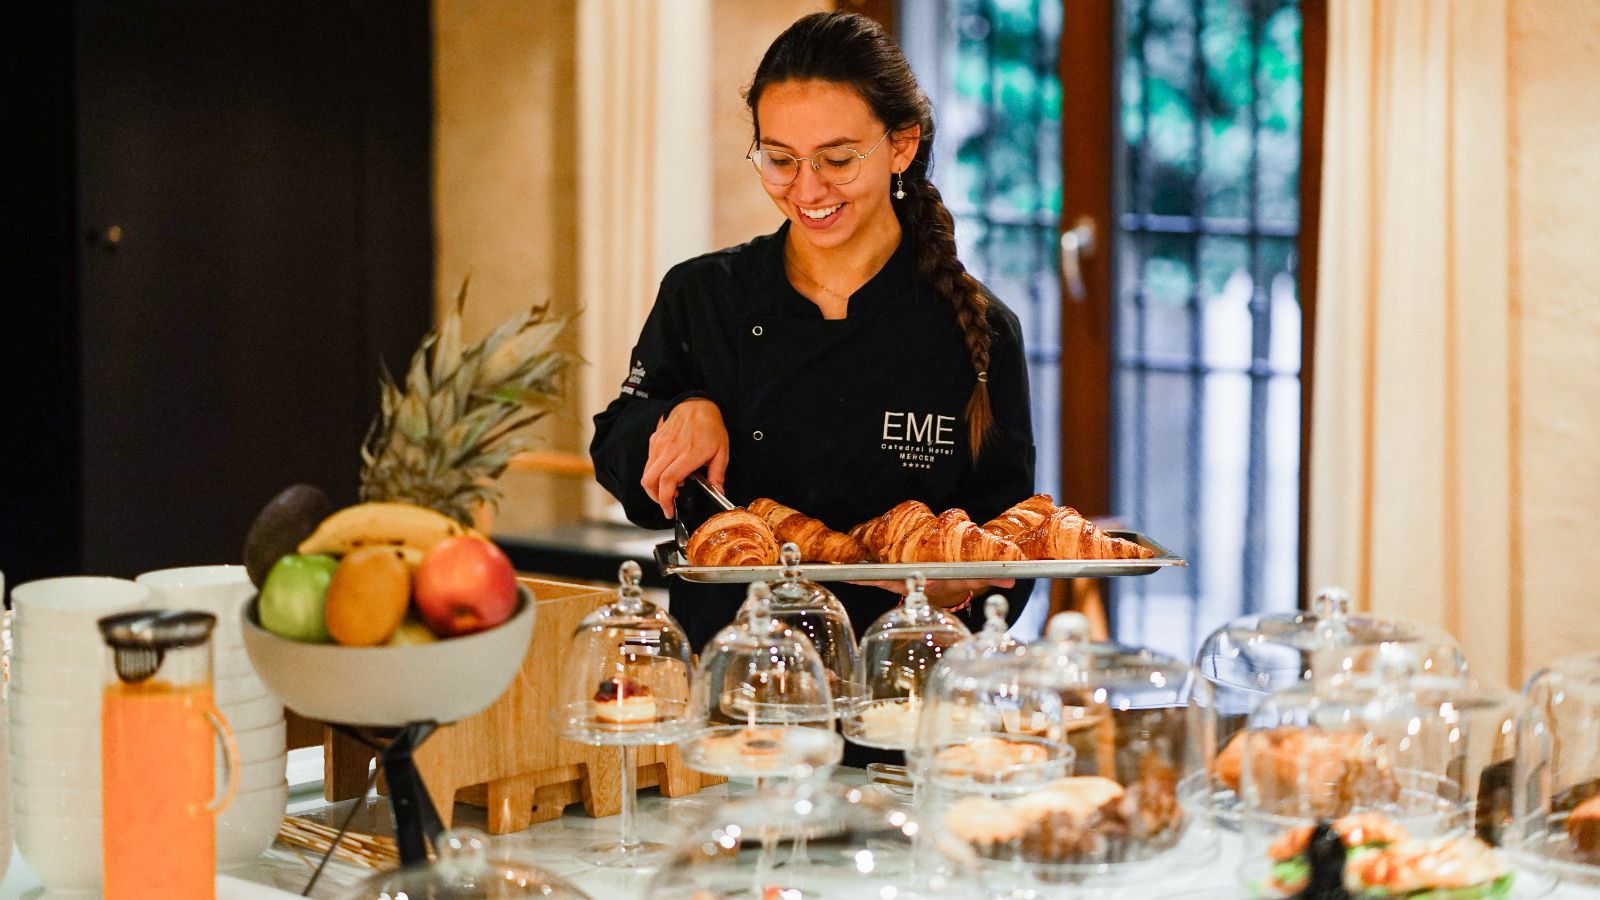 Breakfast buffet at the EME Catedral Mercer Hotel